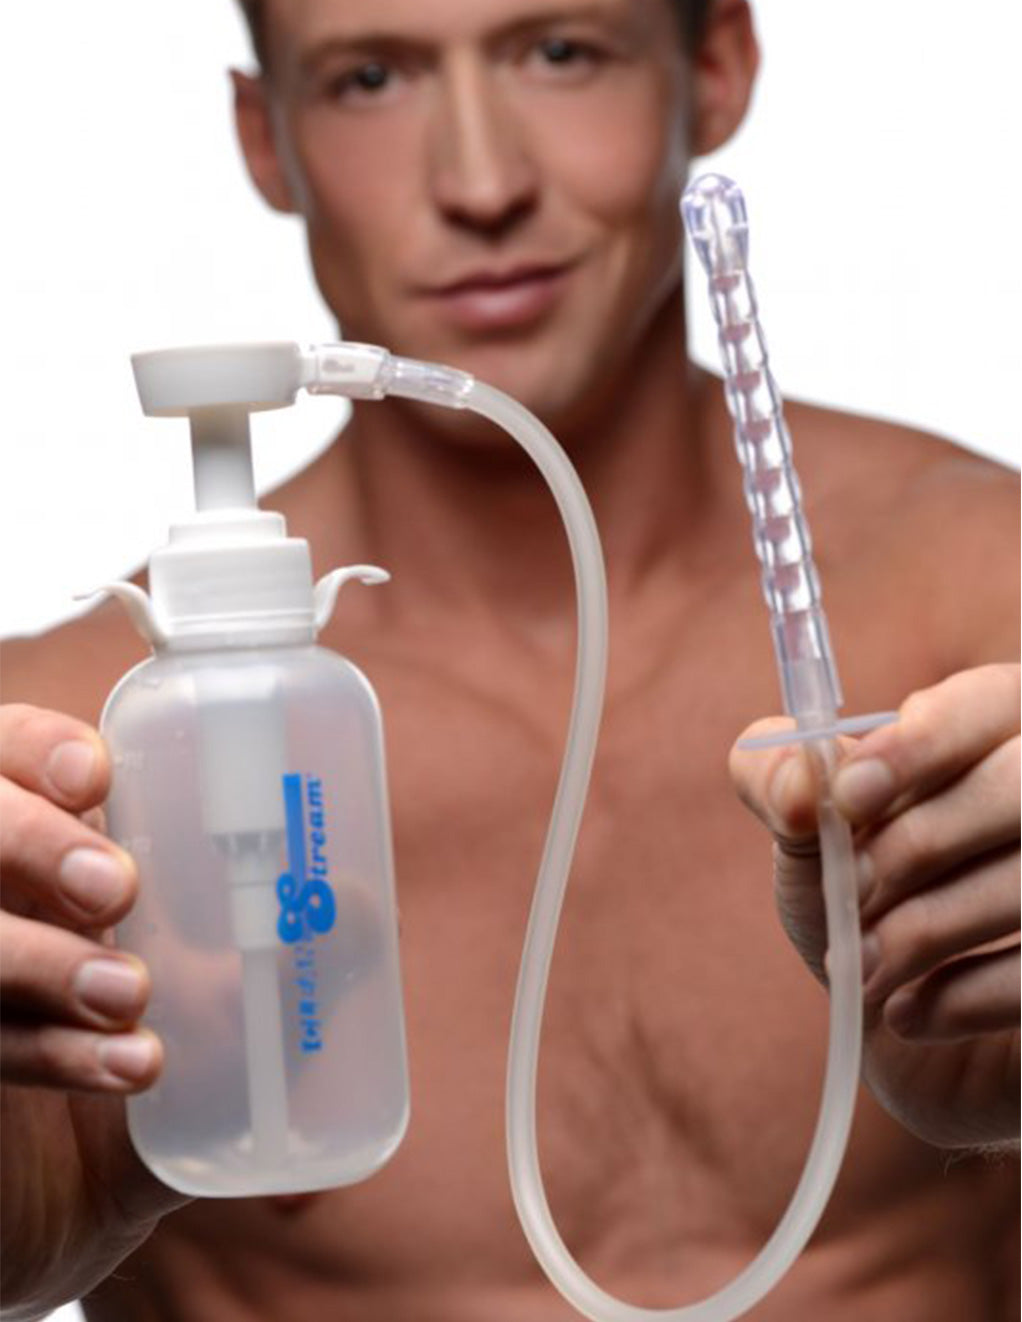 Clean Stream Pump Action Enema Bottle With Nozzle Person Holding The Product